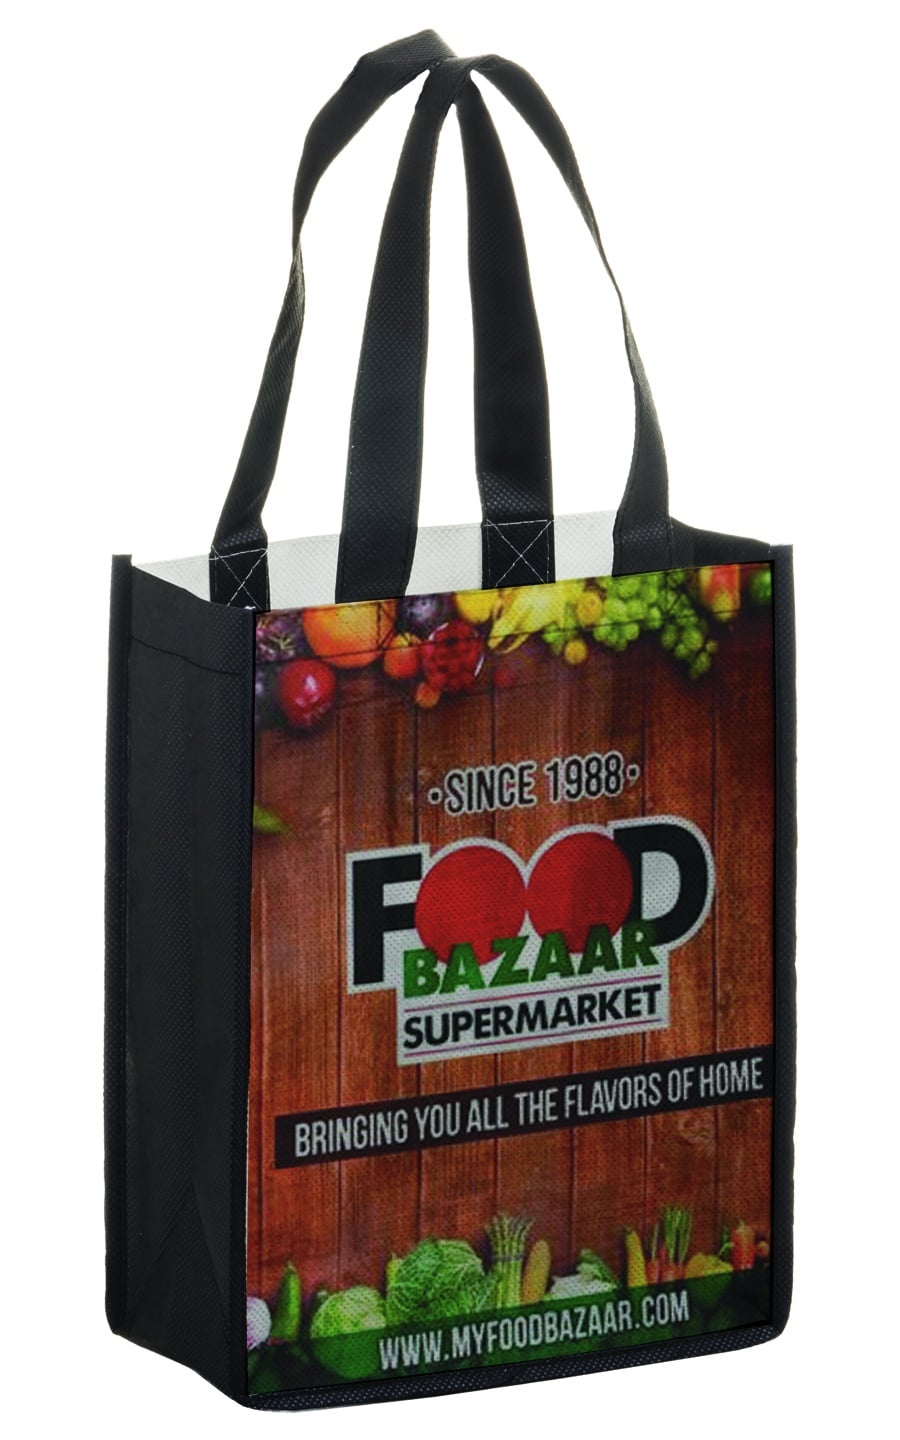 Fully Custom Sublimation Printed Laminated Tote Bags